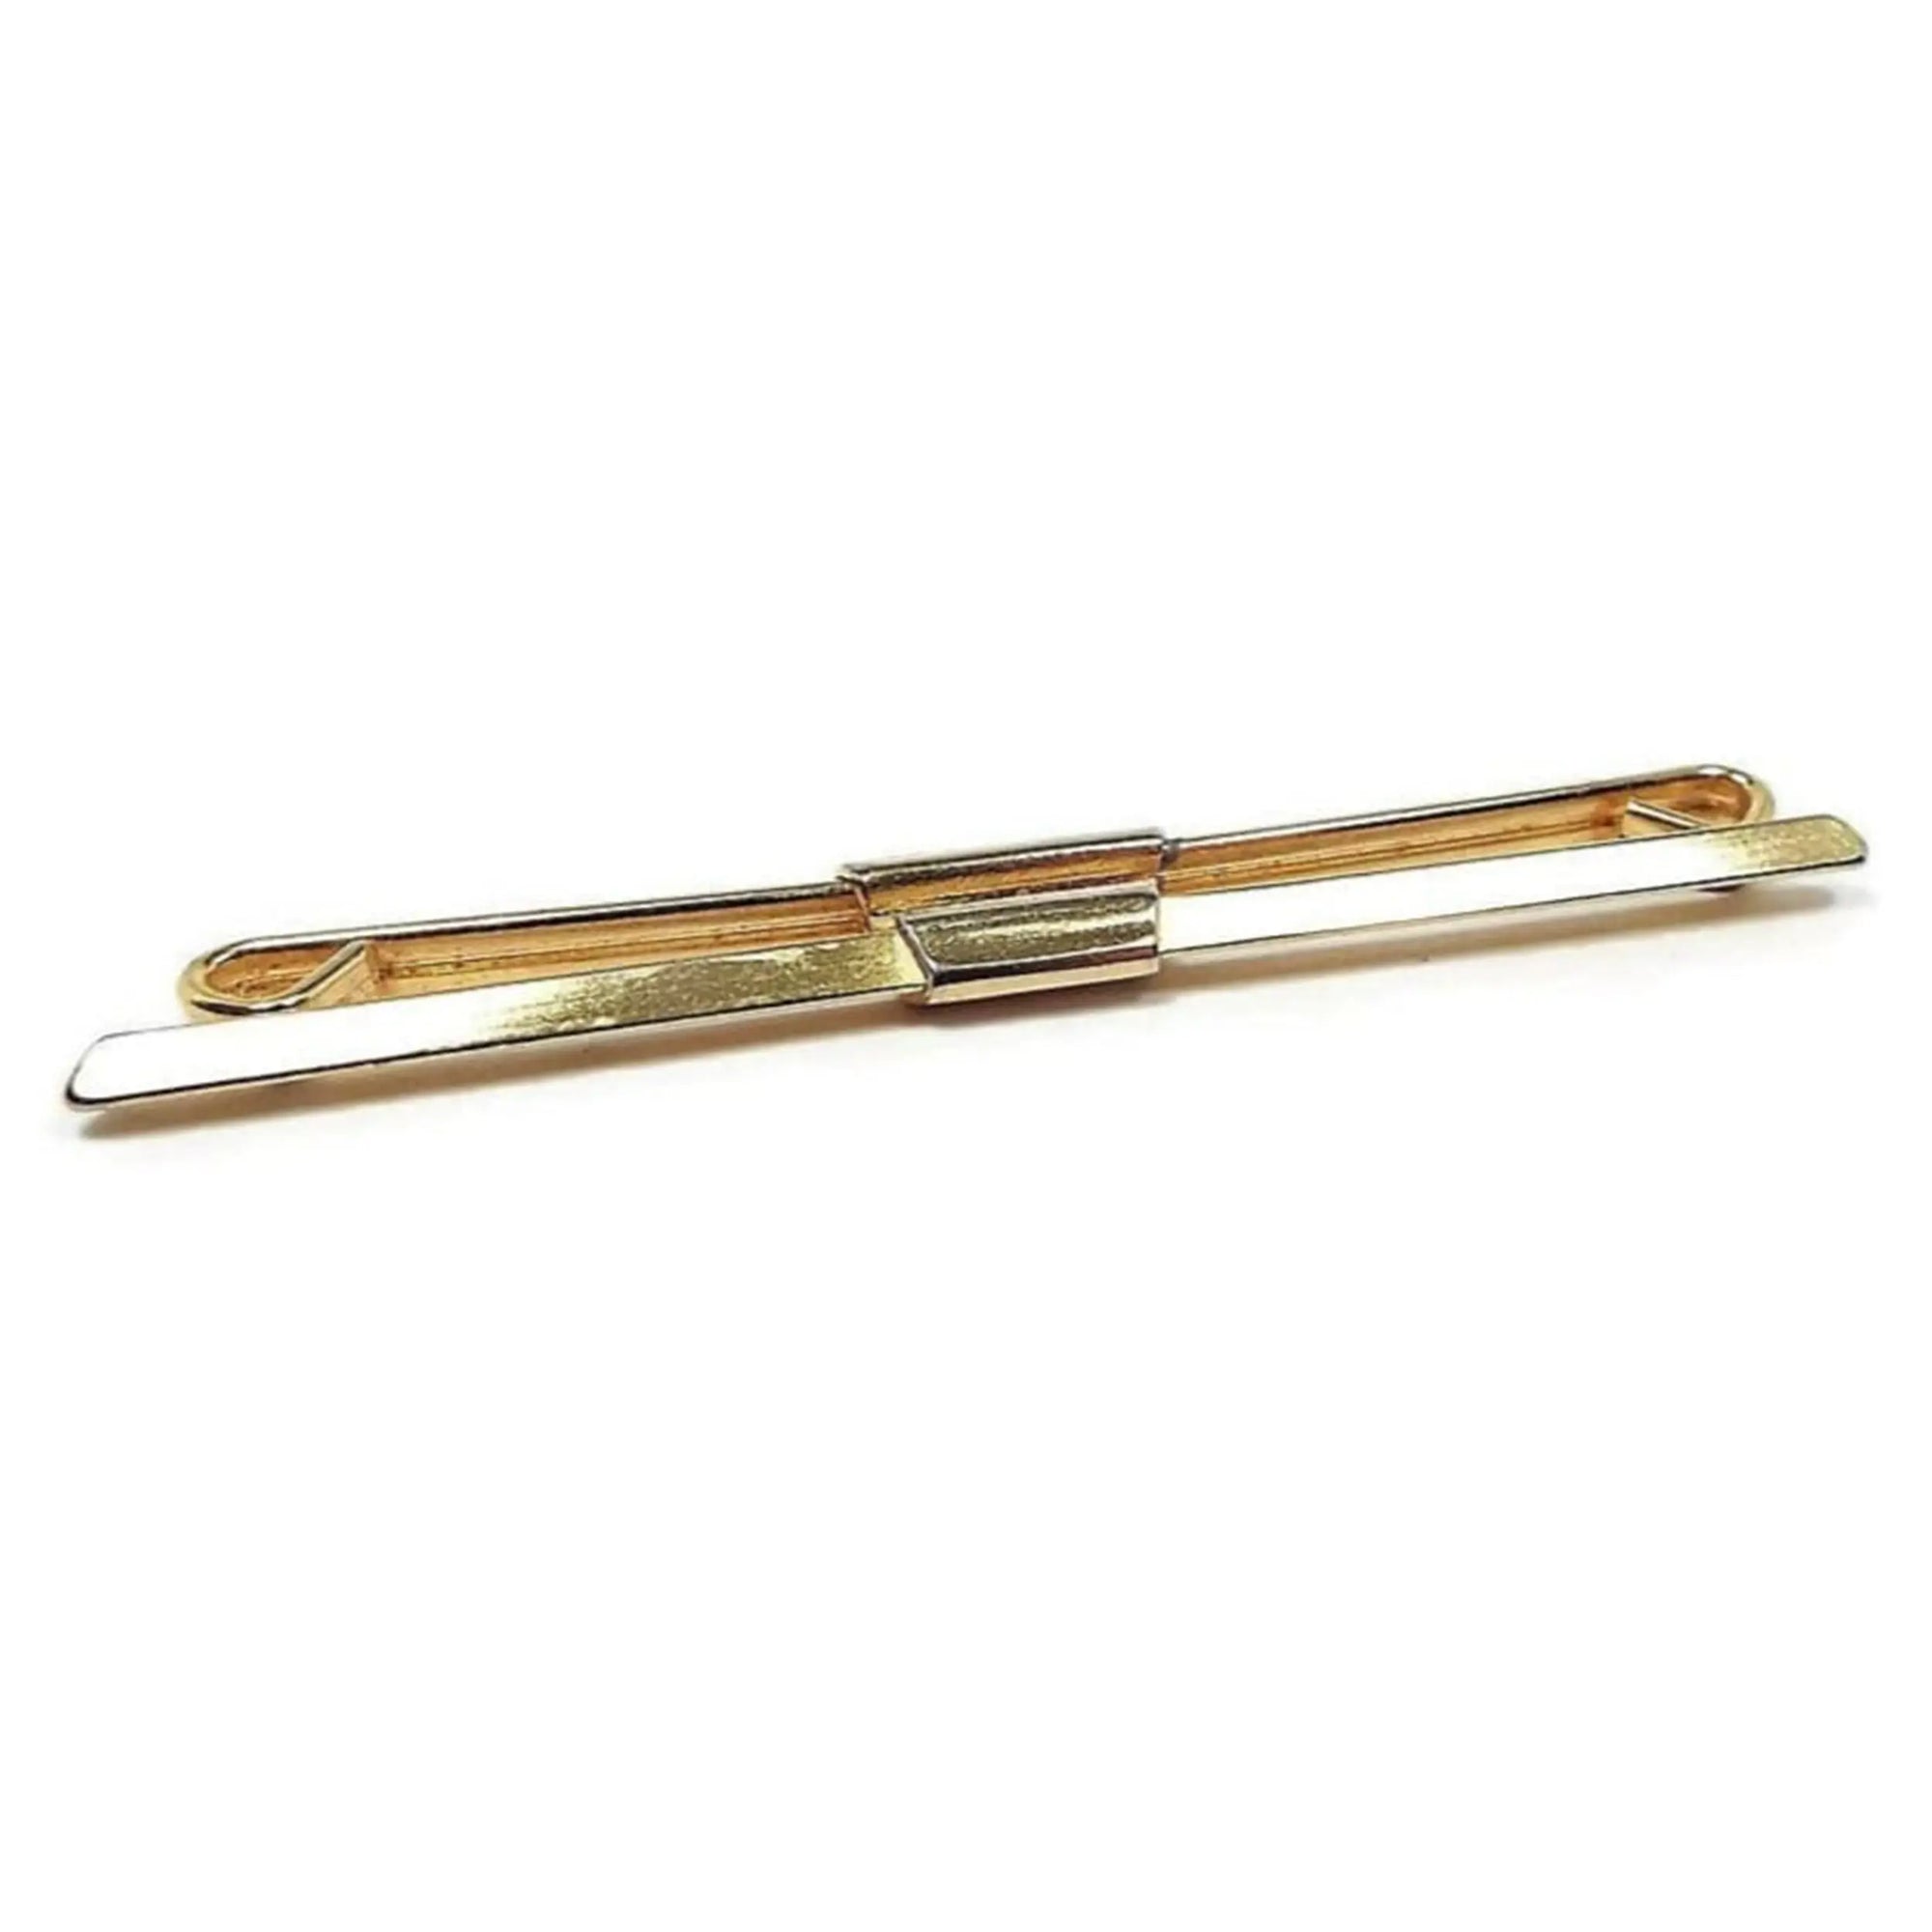 Angled front and side view of the Mid Century vintage collar clip bar. The metal is gold tone in color. The front of the bar is straight and has a tapered angled front edge. The back bar is straight and curls inwards at the ends. There is a rectangular piece in the middle that secures the bars together.